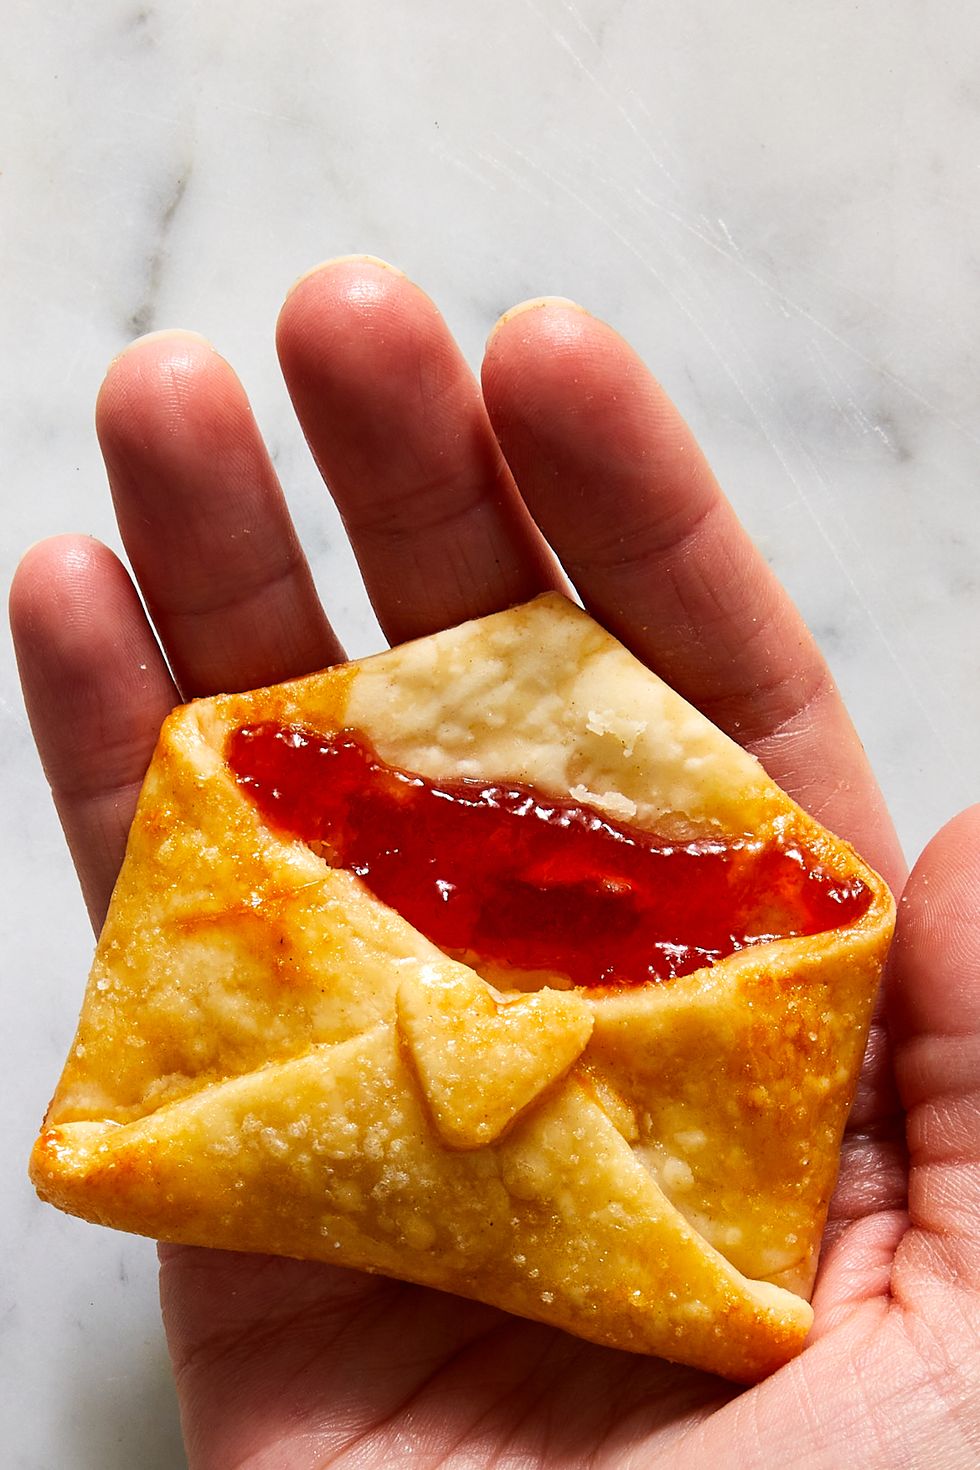 strawberry jam filled cookies that are folded and baked to look like love notes